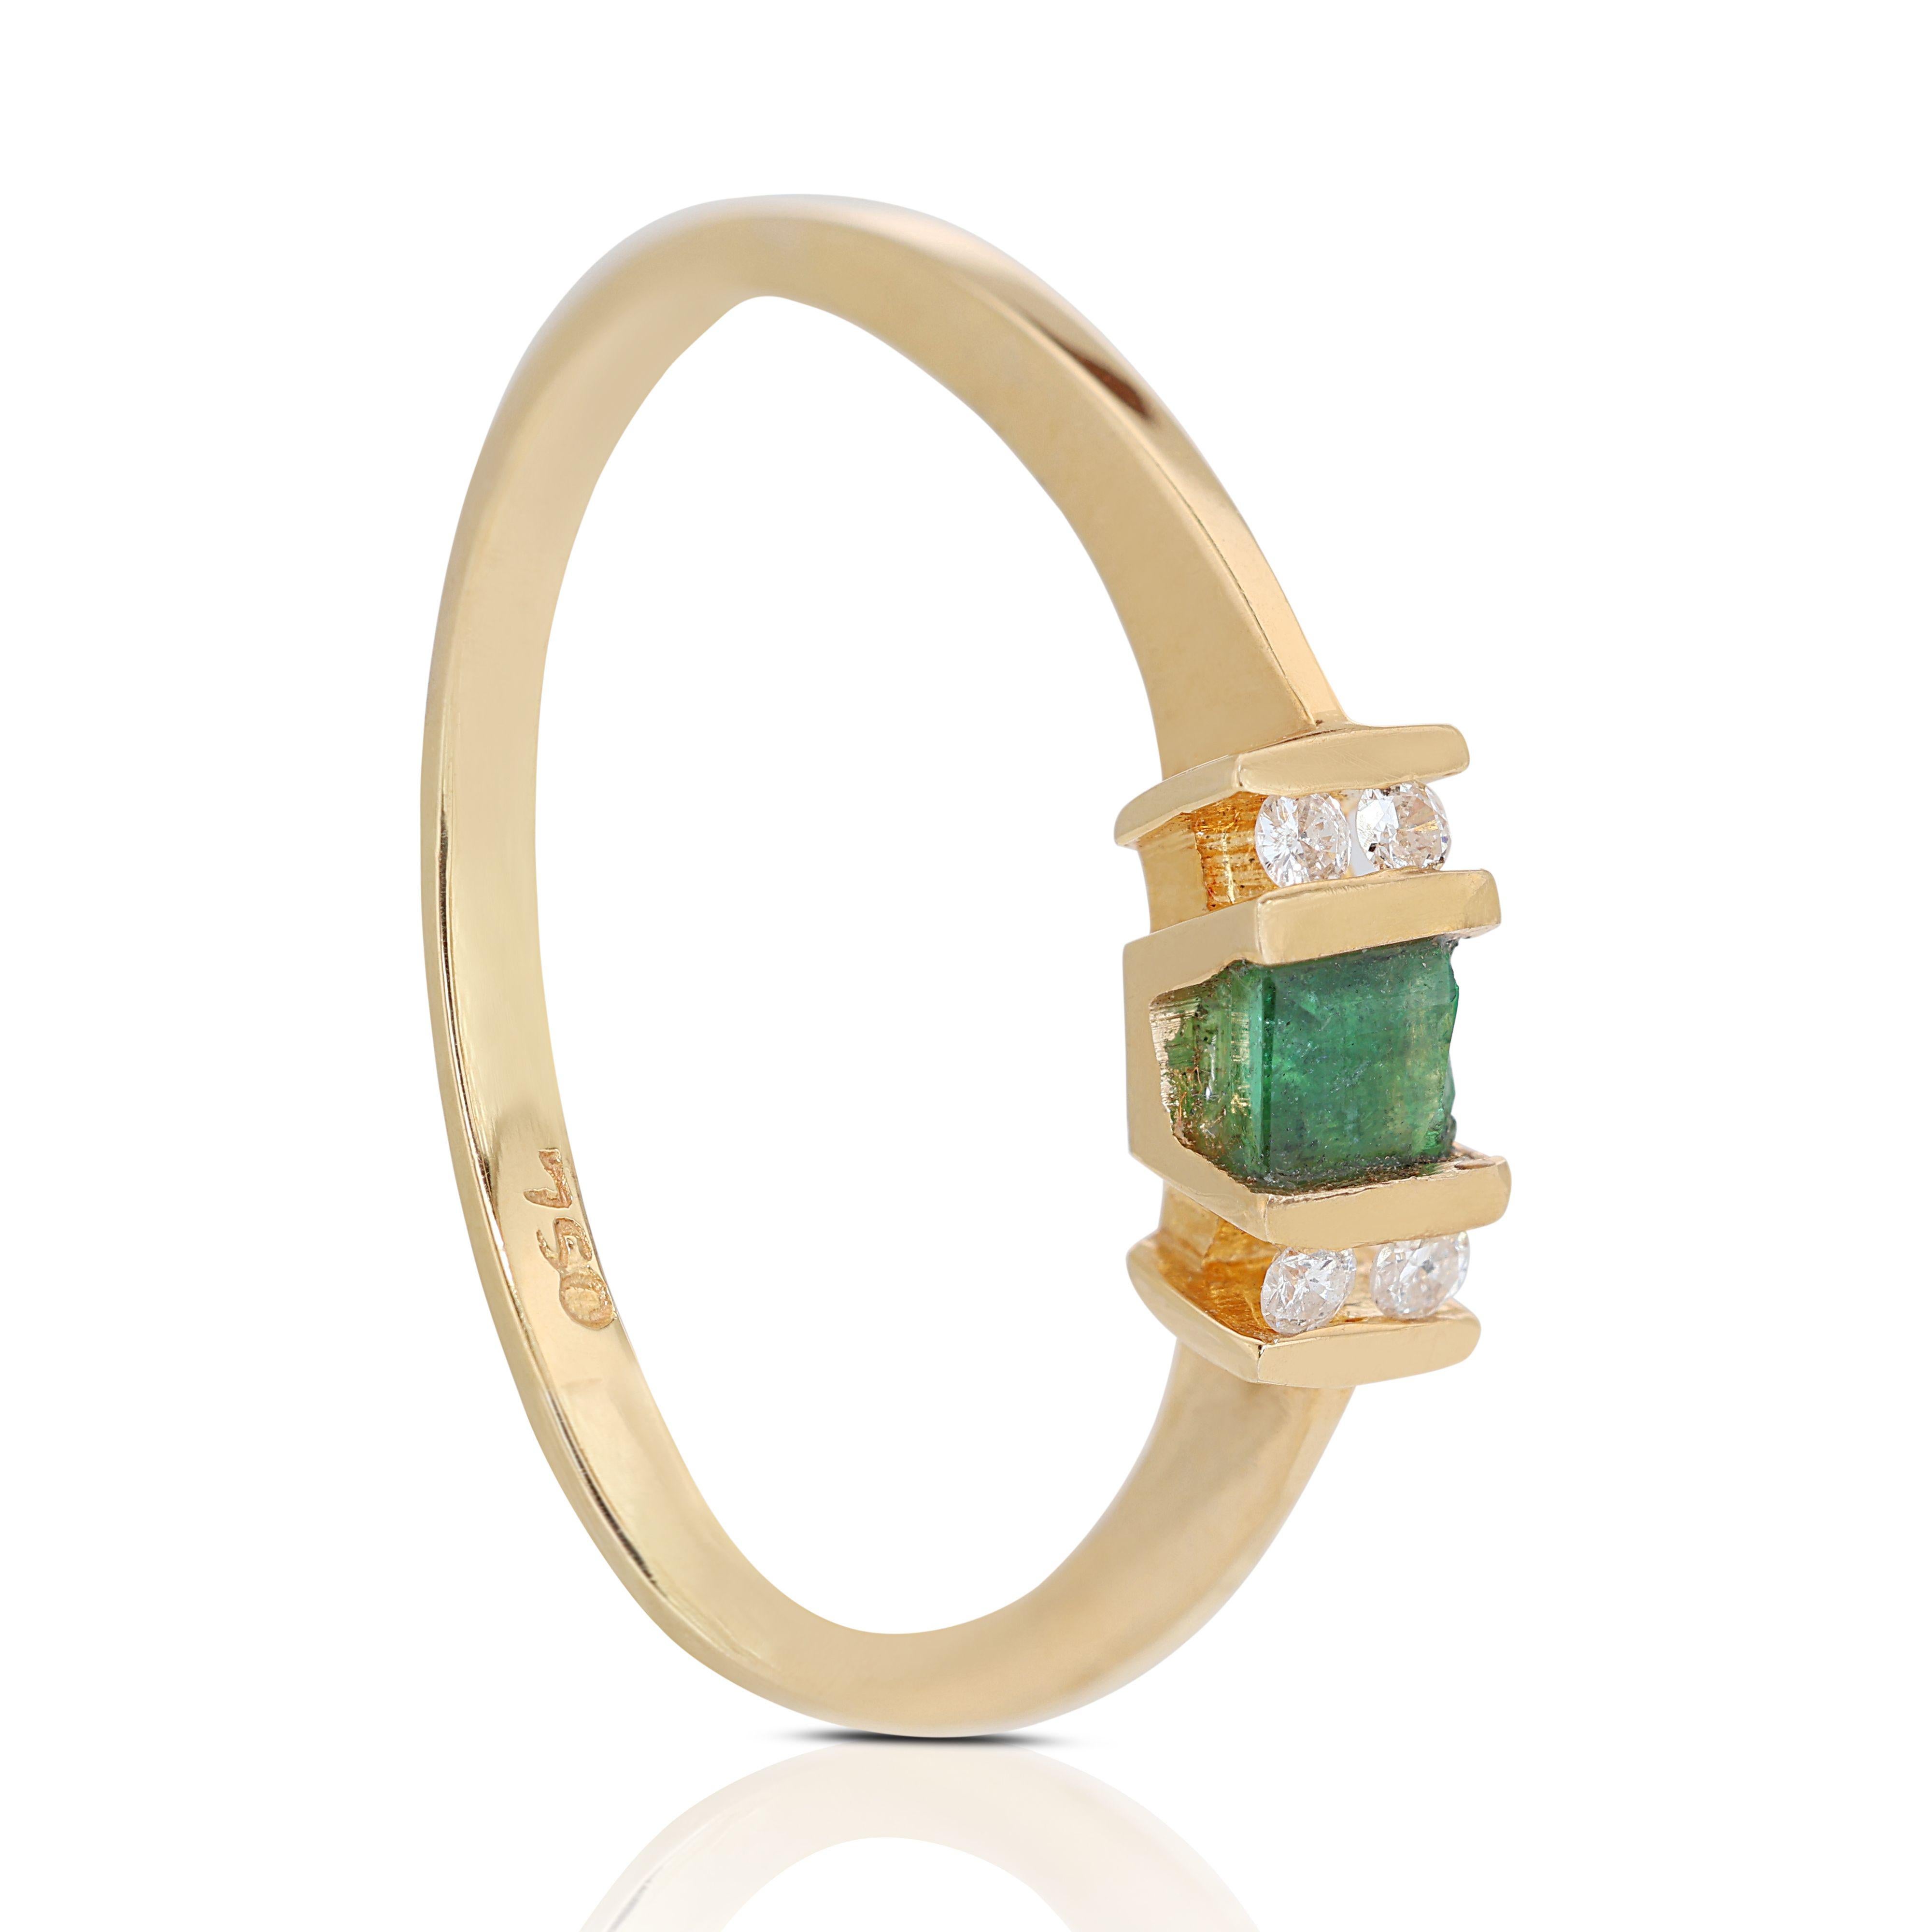 Exquisite 3-stone Emerald Diamond Ring in 18K Yellow Gold For Sale 3